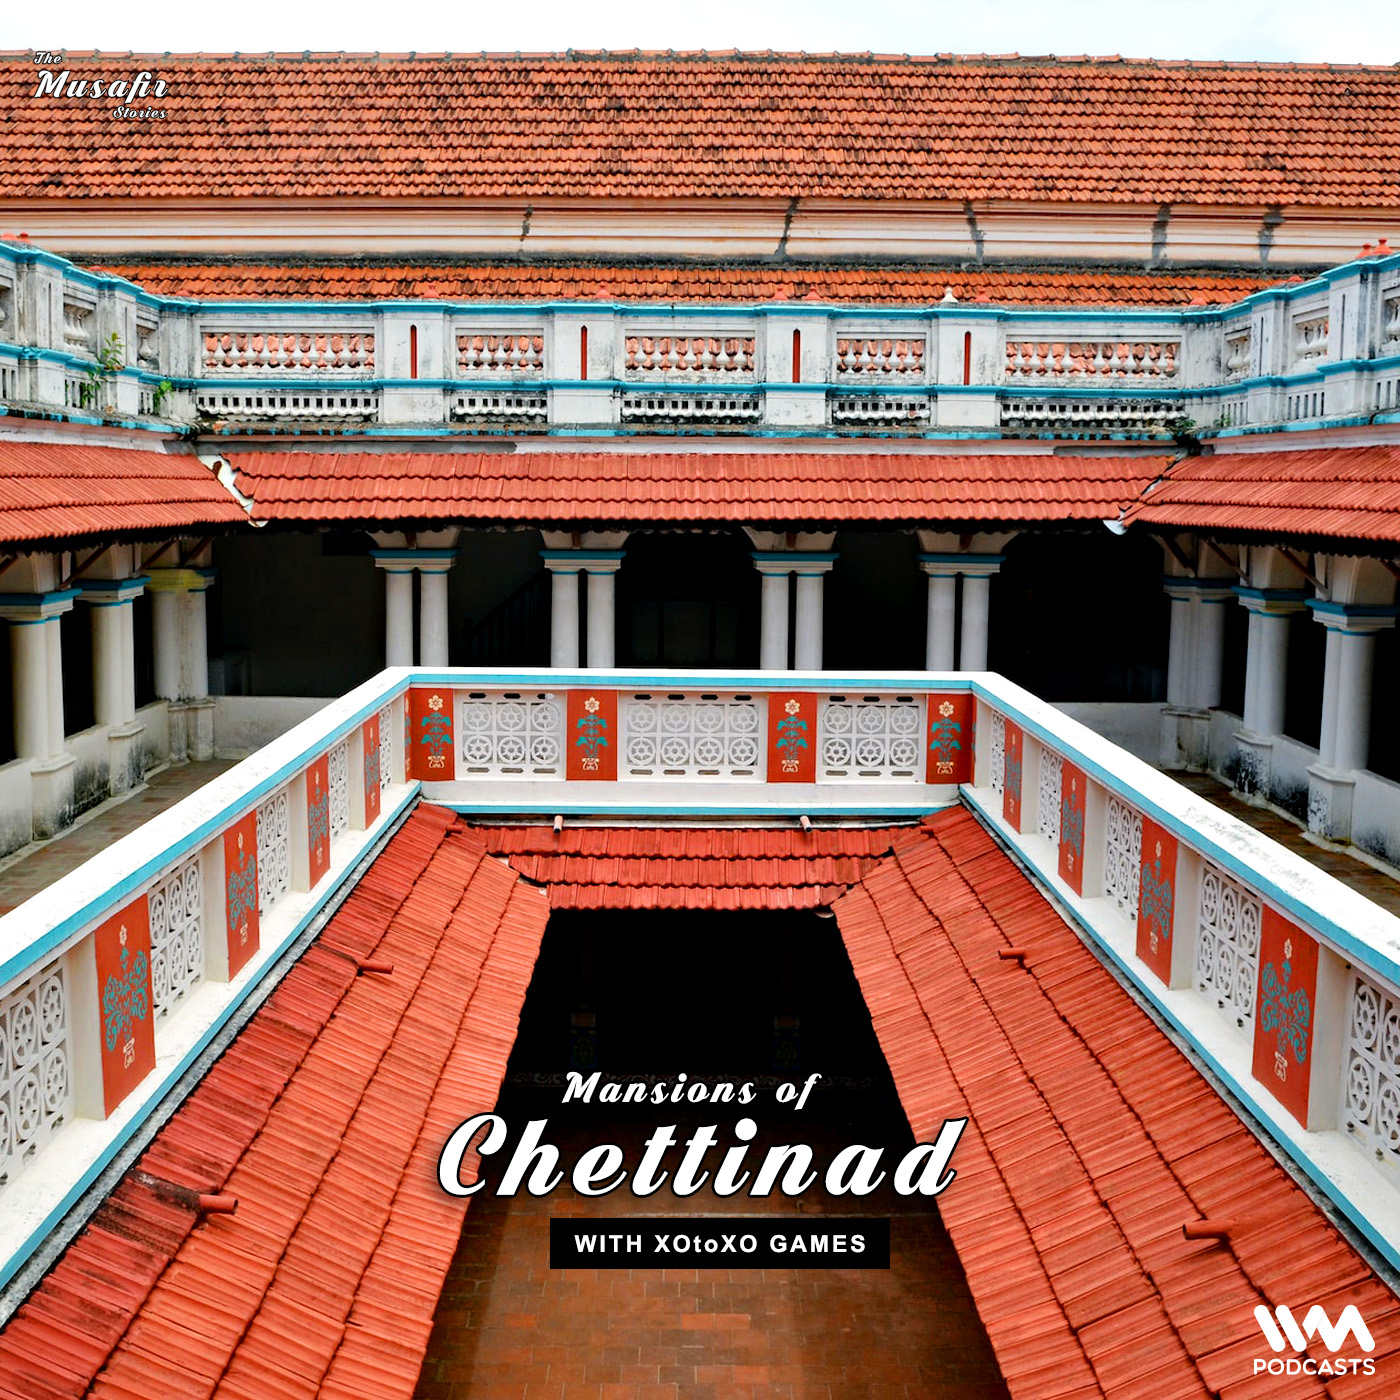 Mansions of Chettinad with XOtoXO games